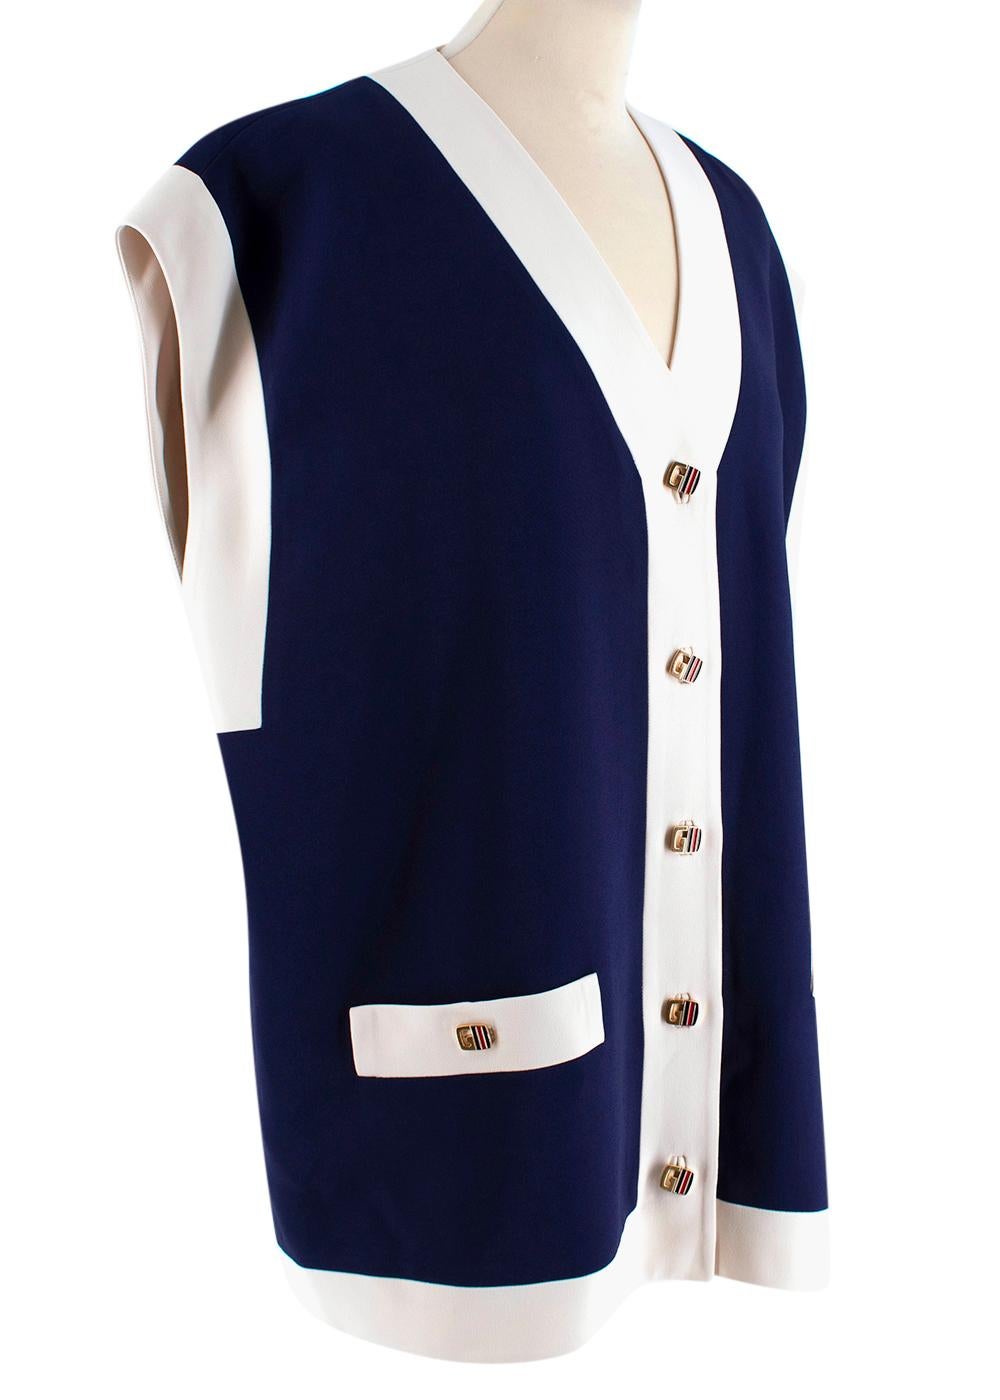 Gucci Blue Crepe Oversized Cady Vest

This blue and white woven vest has all the vintage feels and incorporates the iconic G logo with the signature blue and red Web enamel detailing to the button fastenings. Bringing old into the new. Featuring a